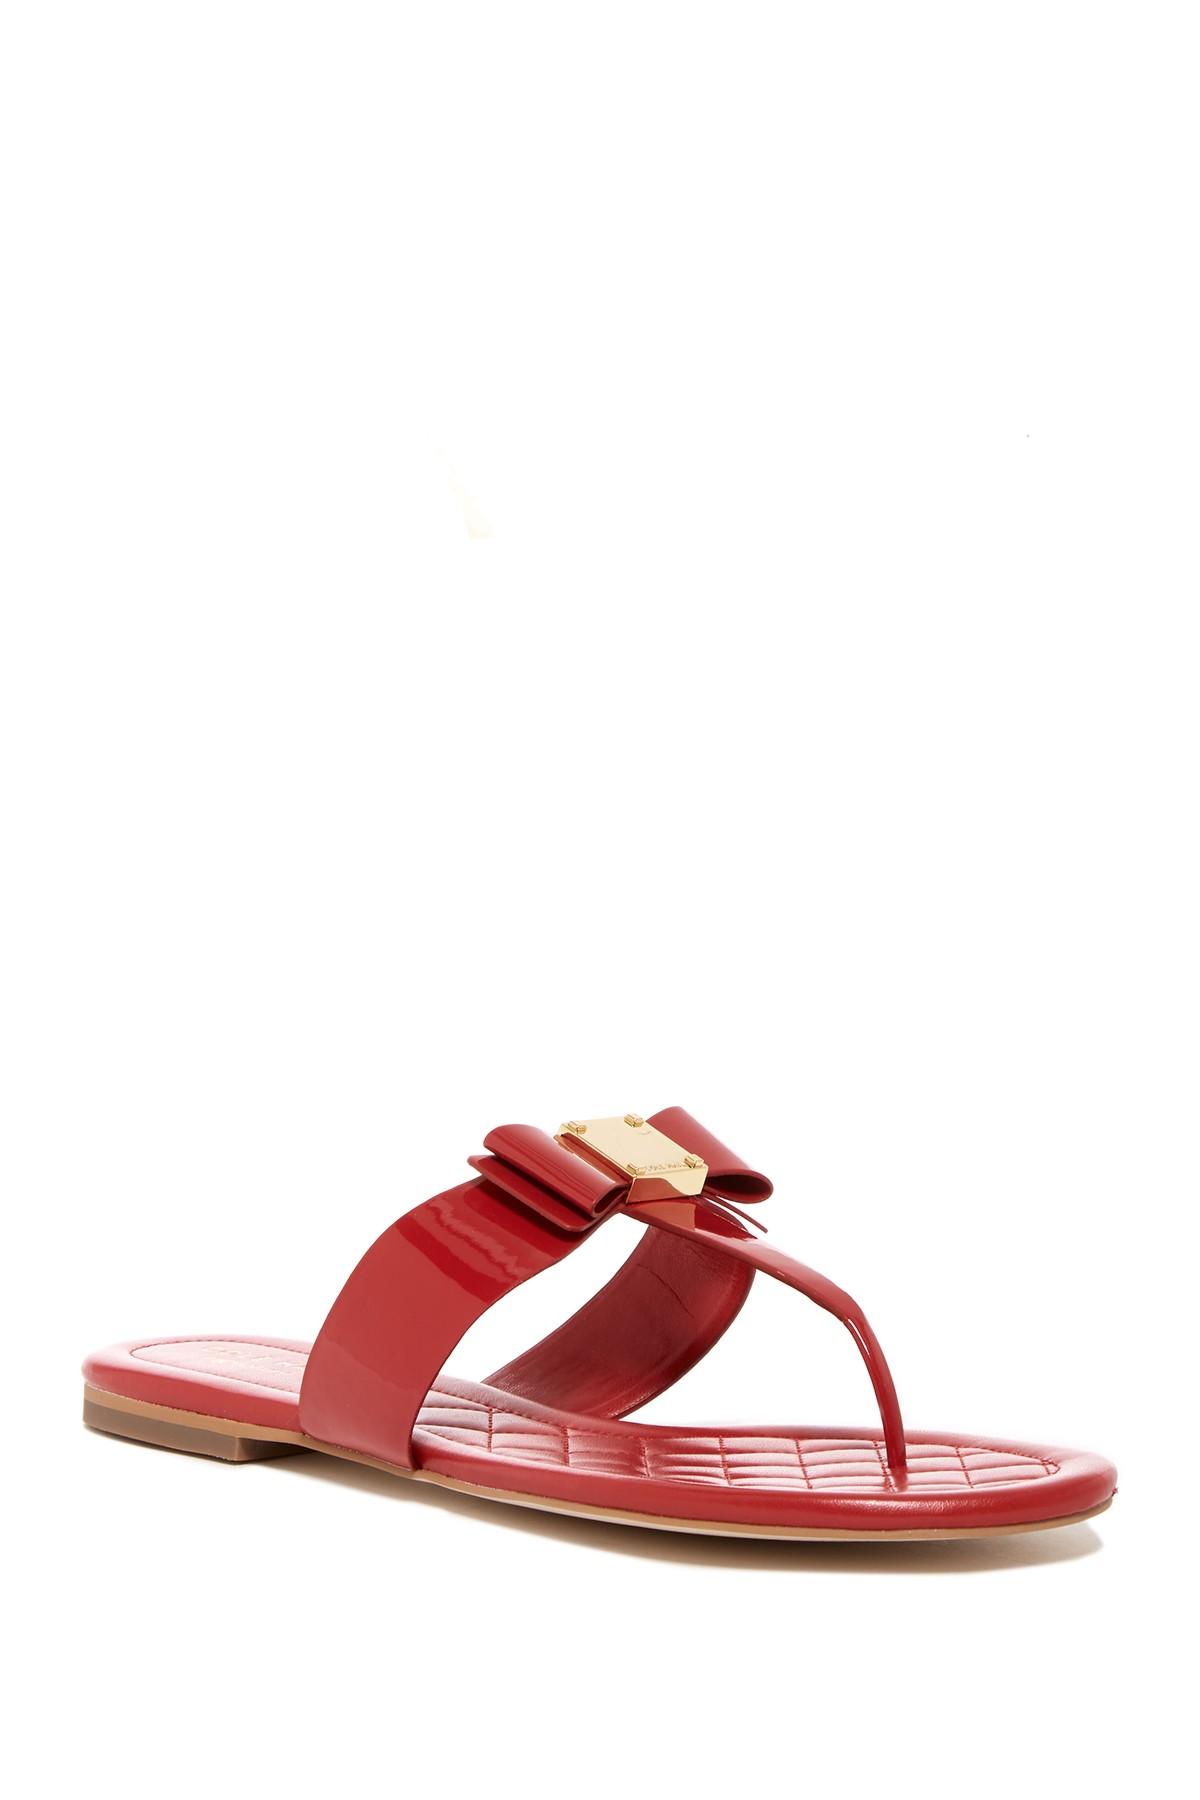 Cole Haan Leather Tali  Bow Sandal  in Red Lyst